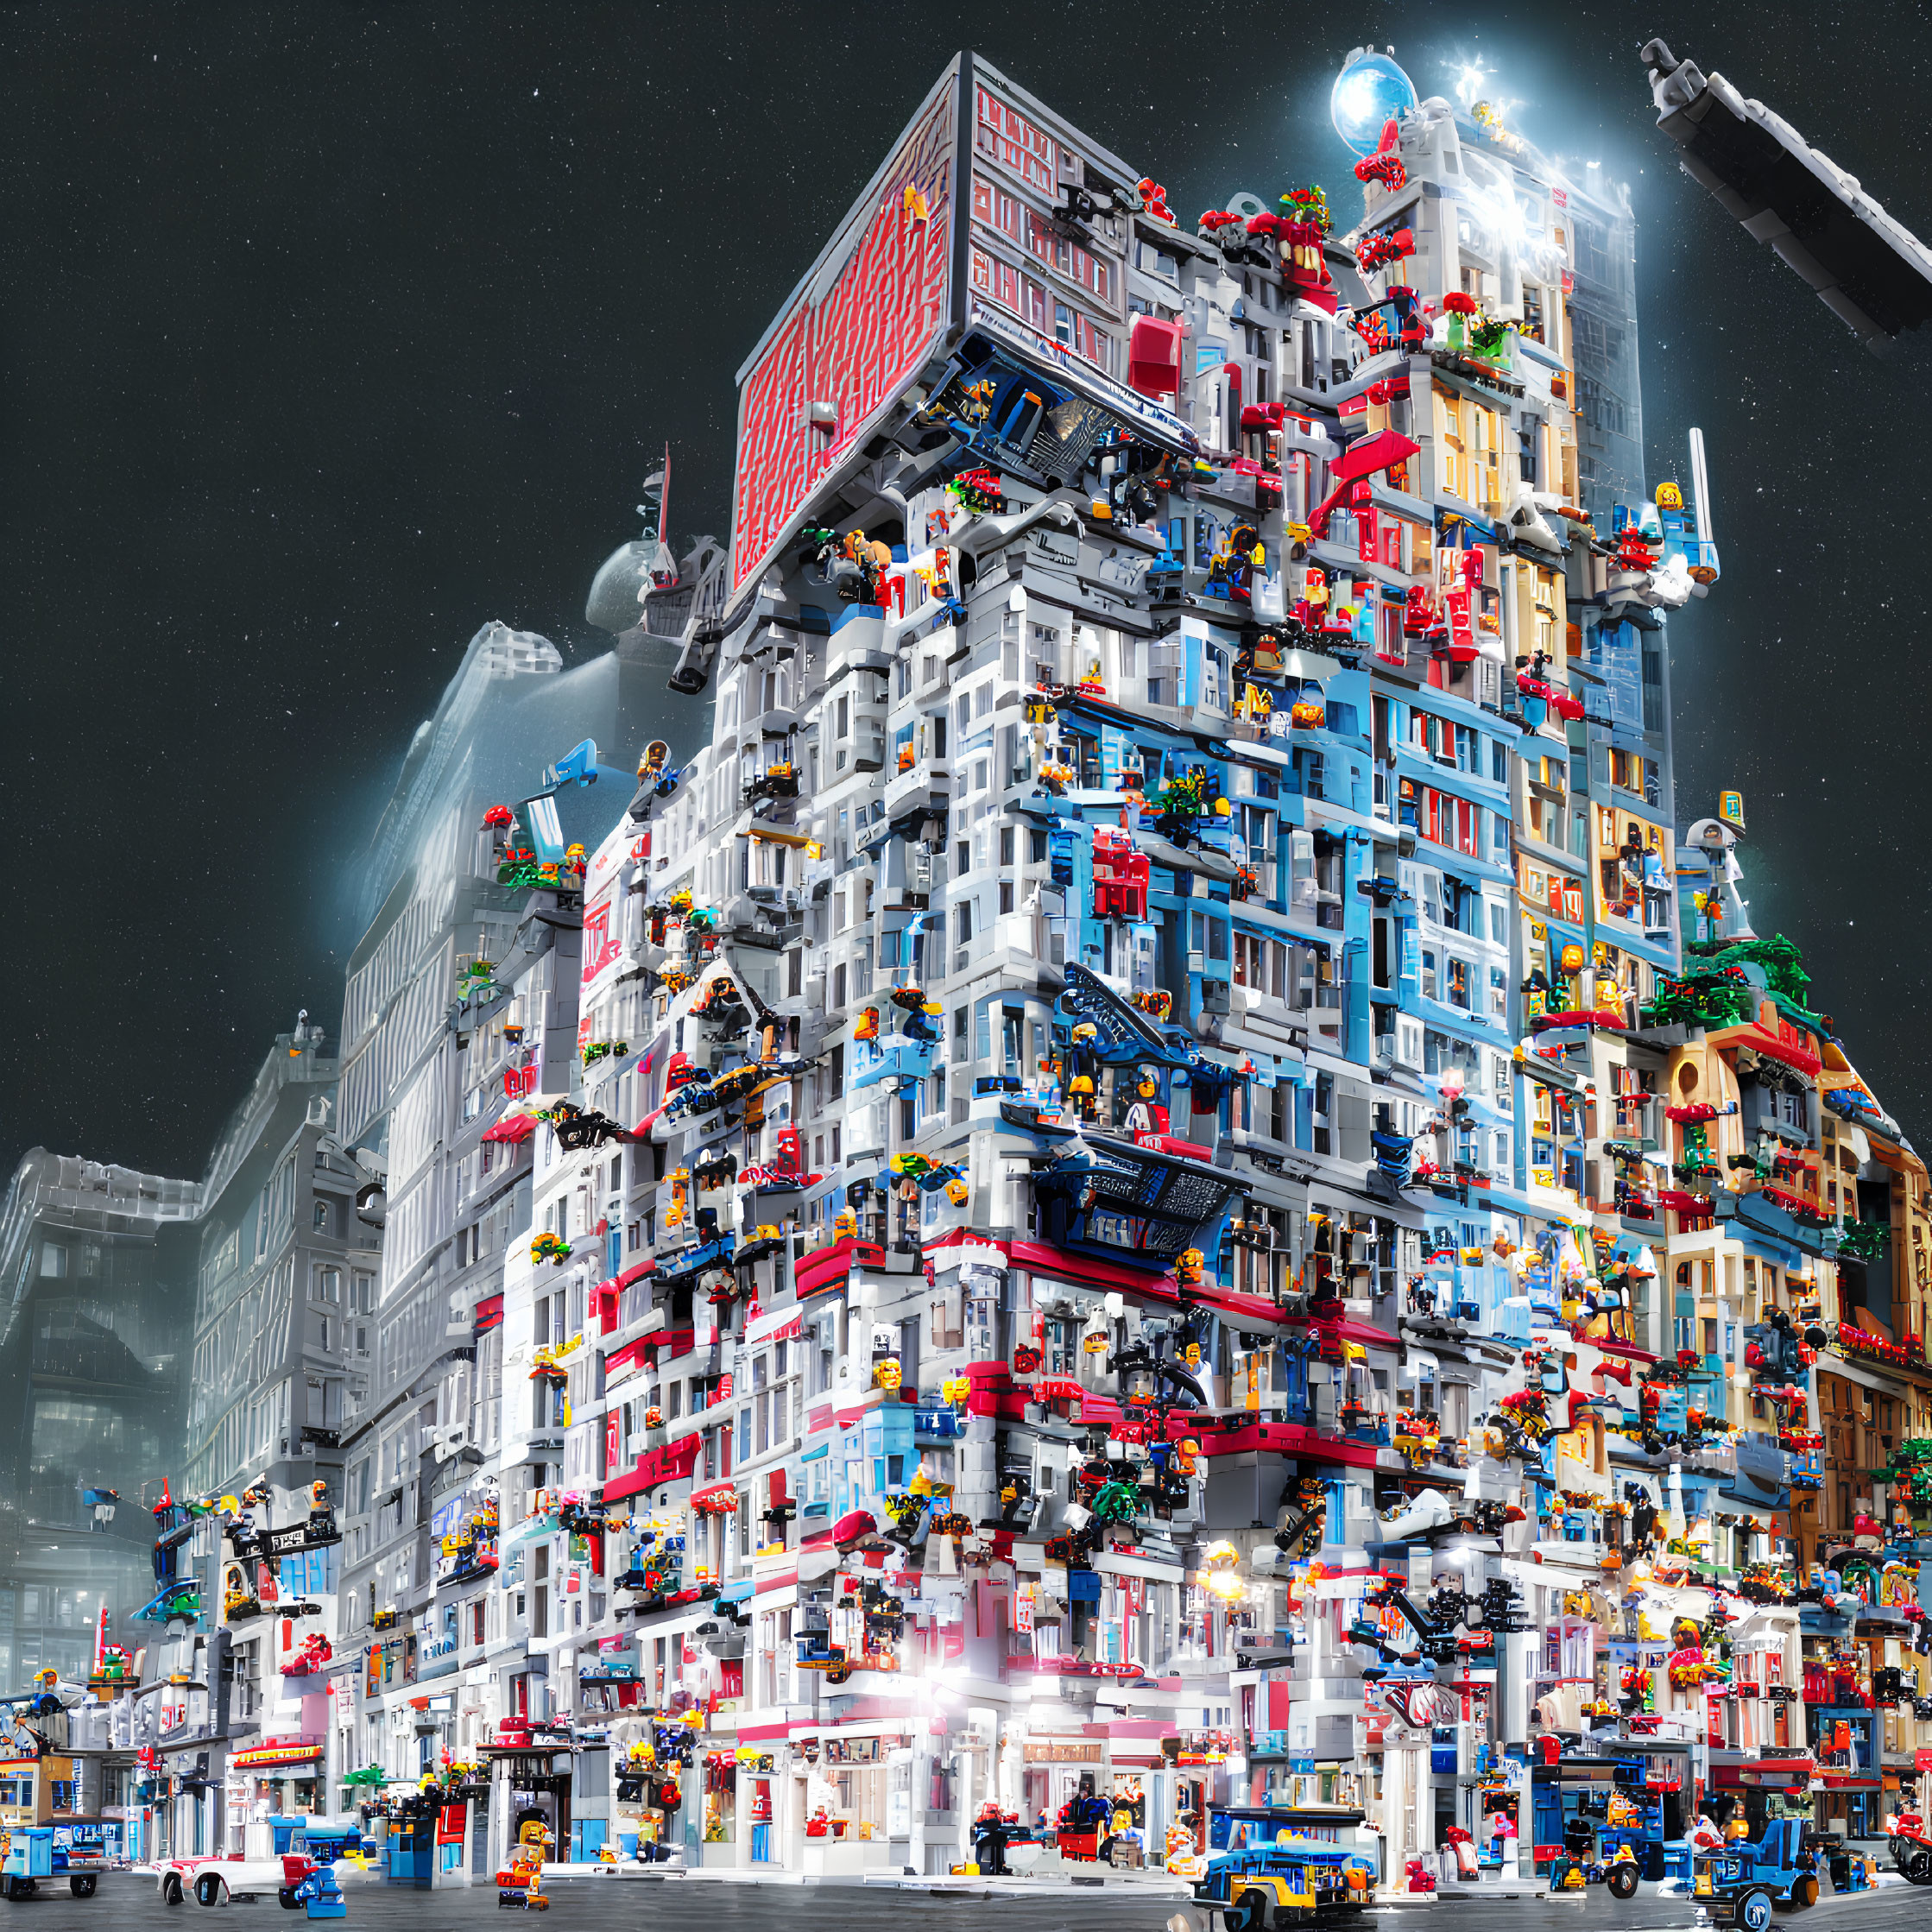 Colorful Lego City Night Scene with Vibrant Buildings and Starry Sky